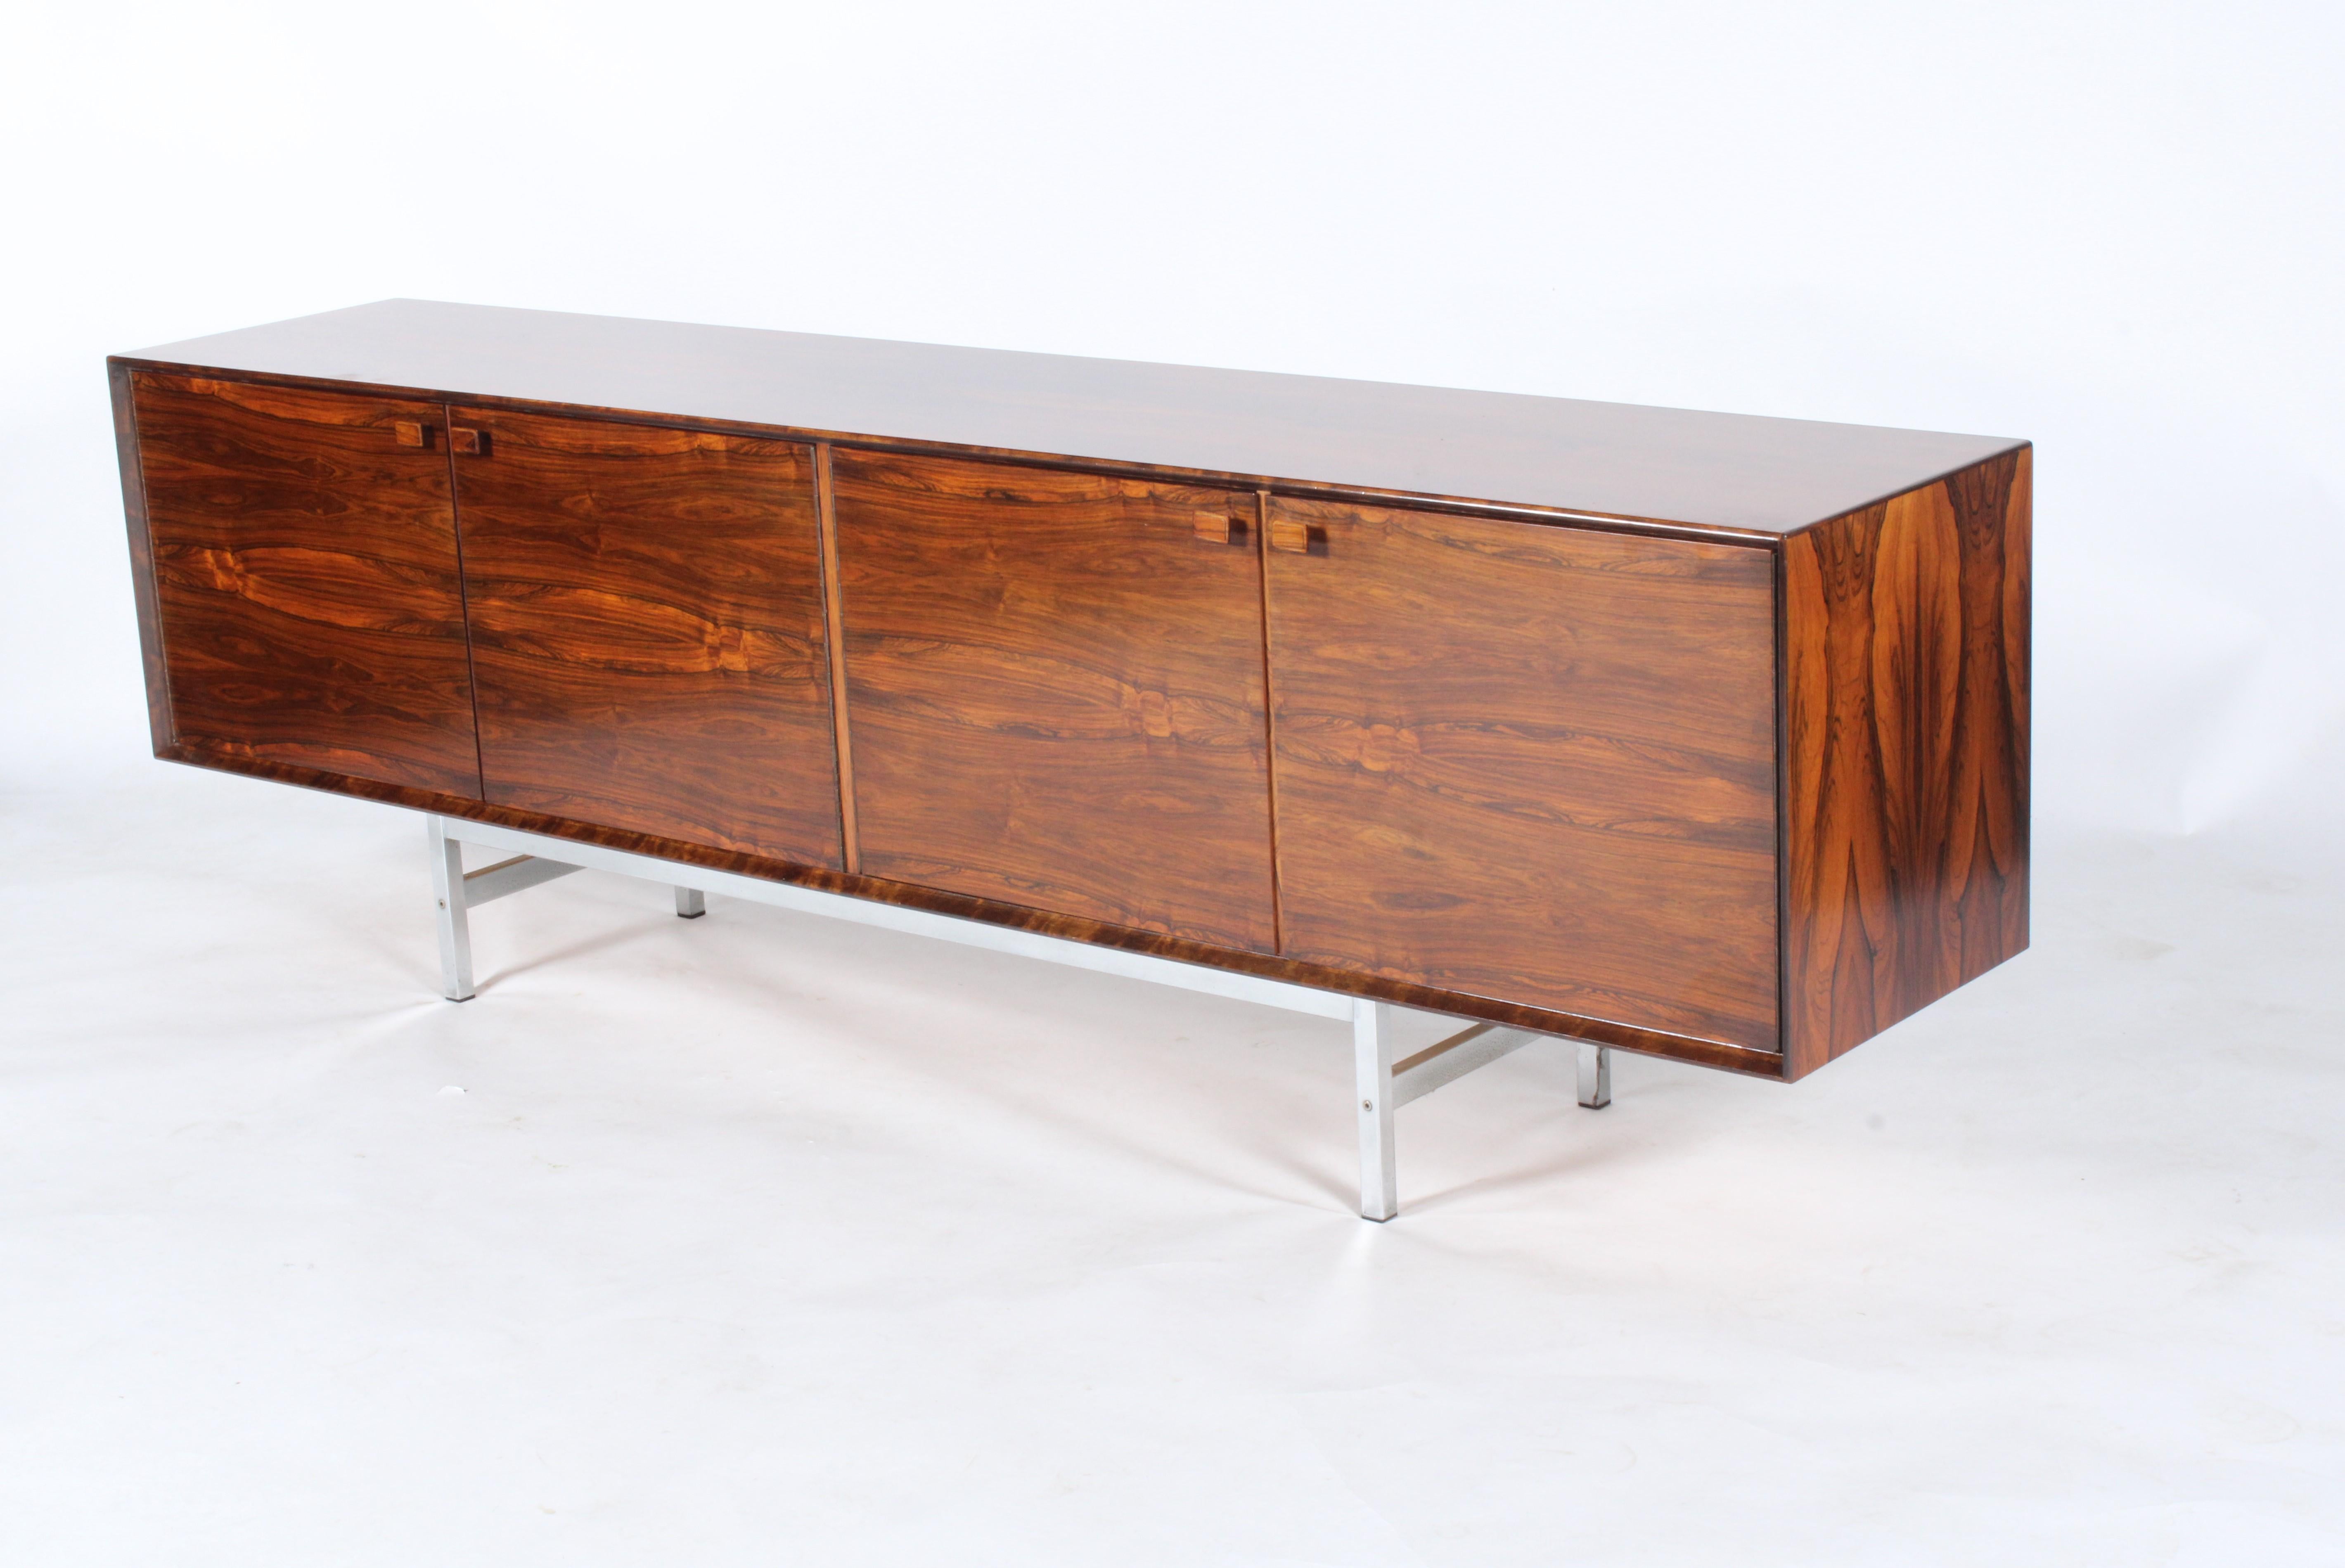 Exceptional Scandinavian  Rio Rosewood Sideboard By Fredrik A Kayser In Good Condition For Sale In Portlaoise, IE